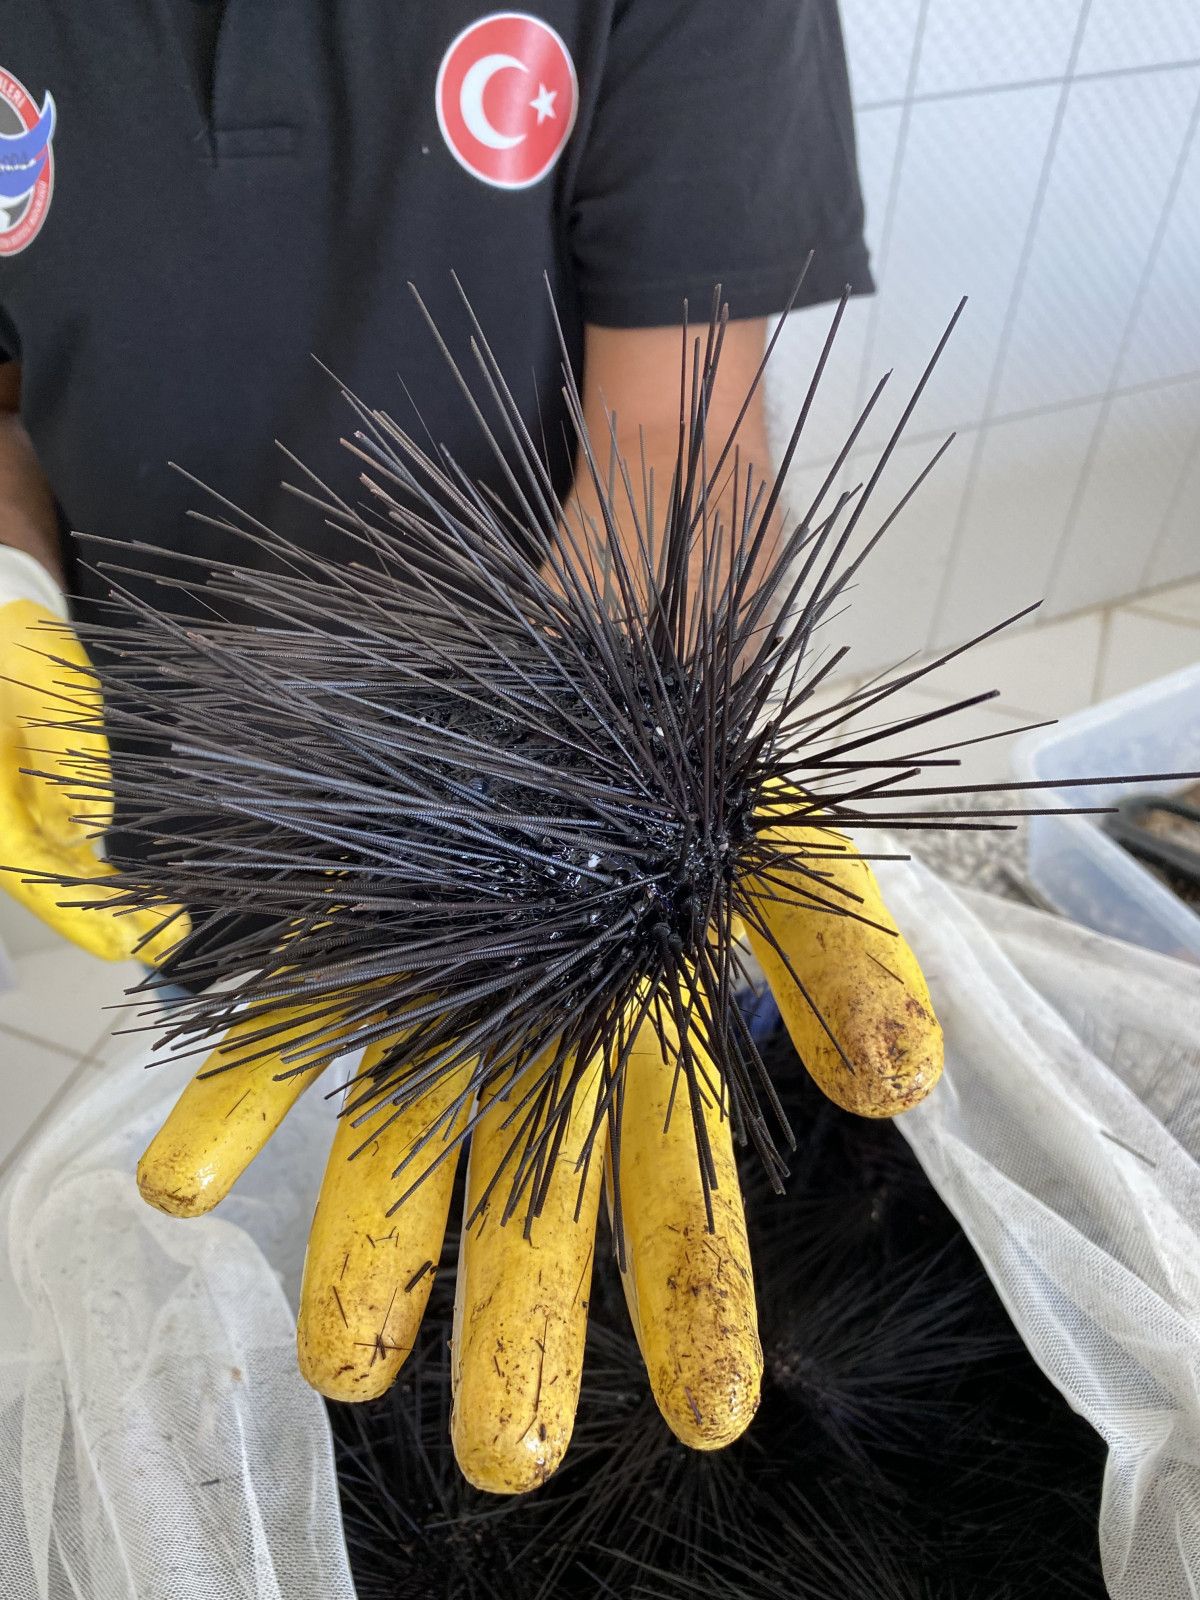 Toxic invasive sea urchins exported to Italy #5